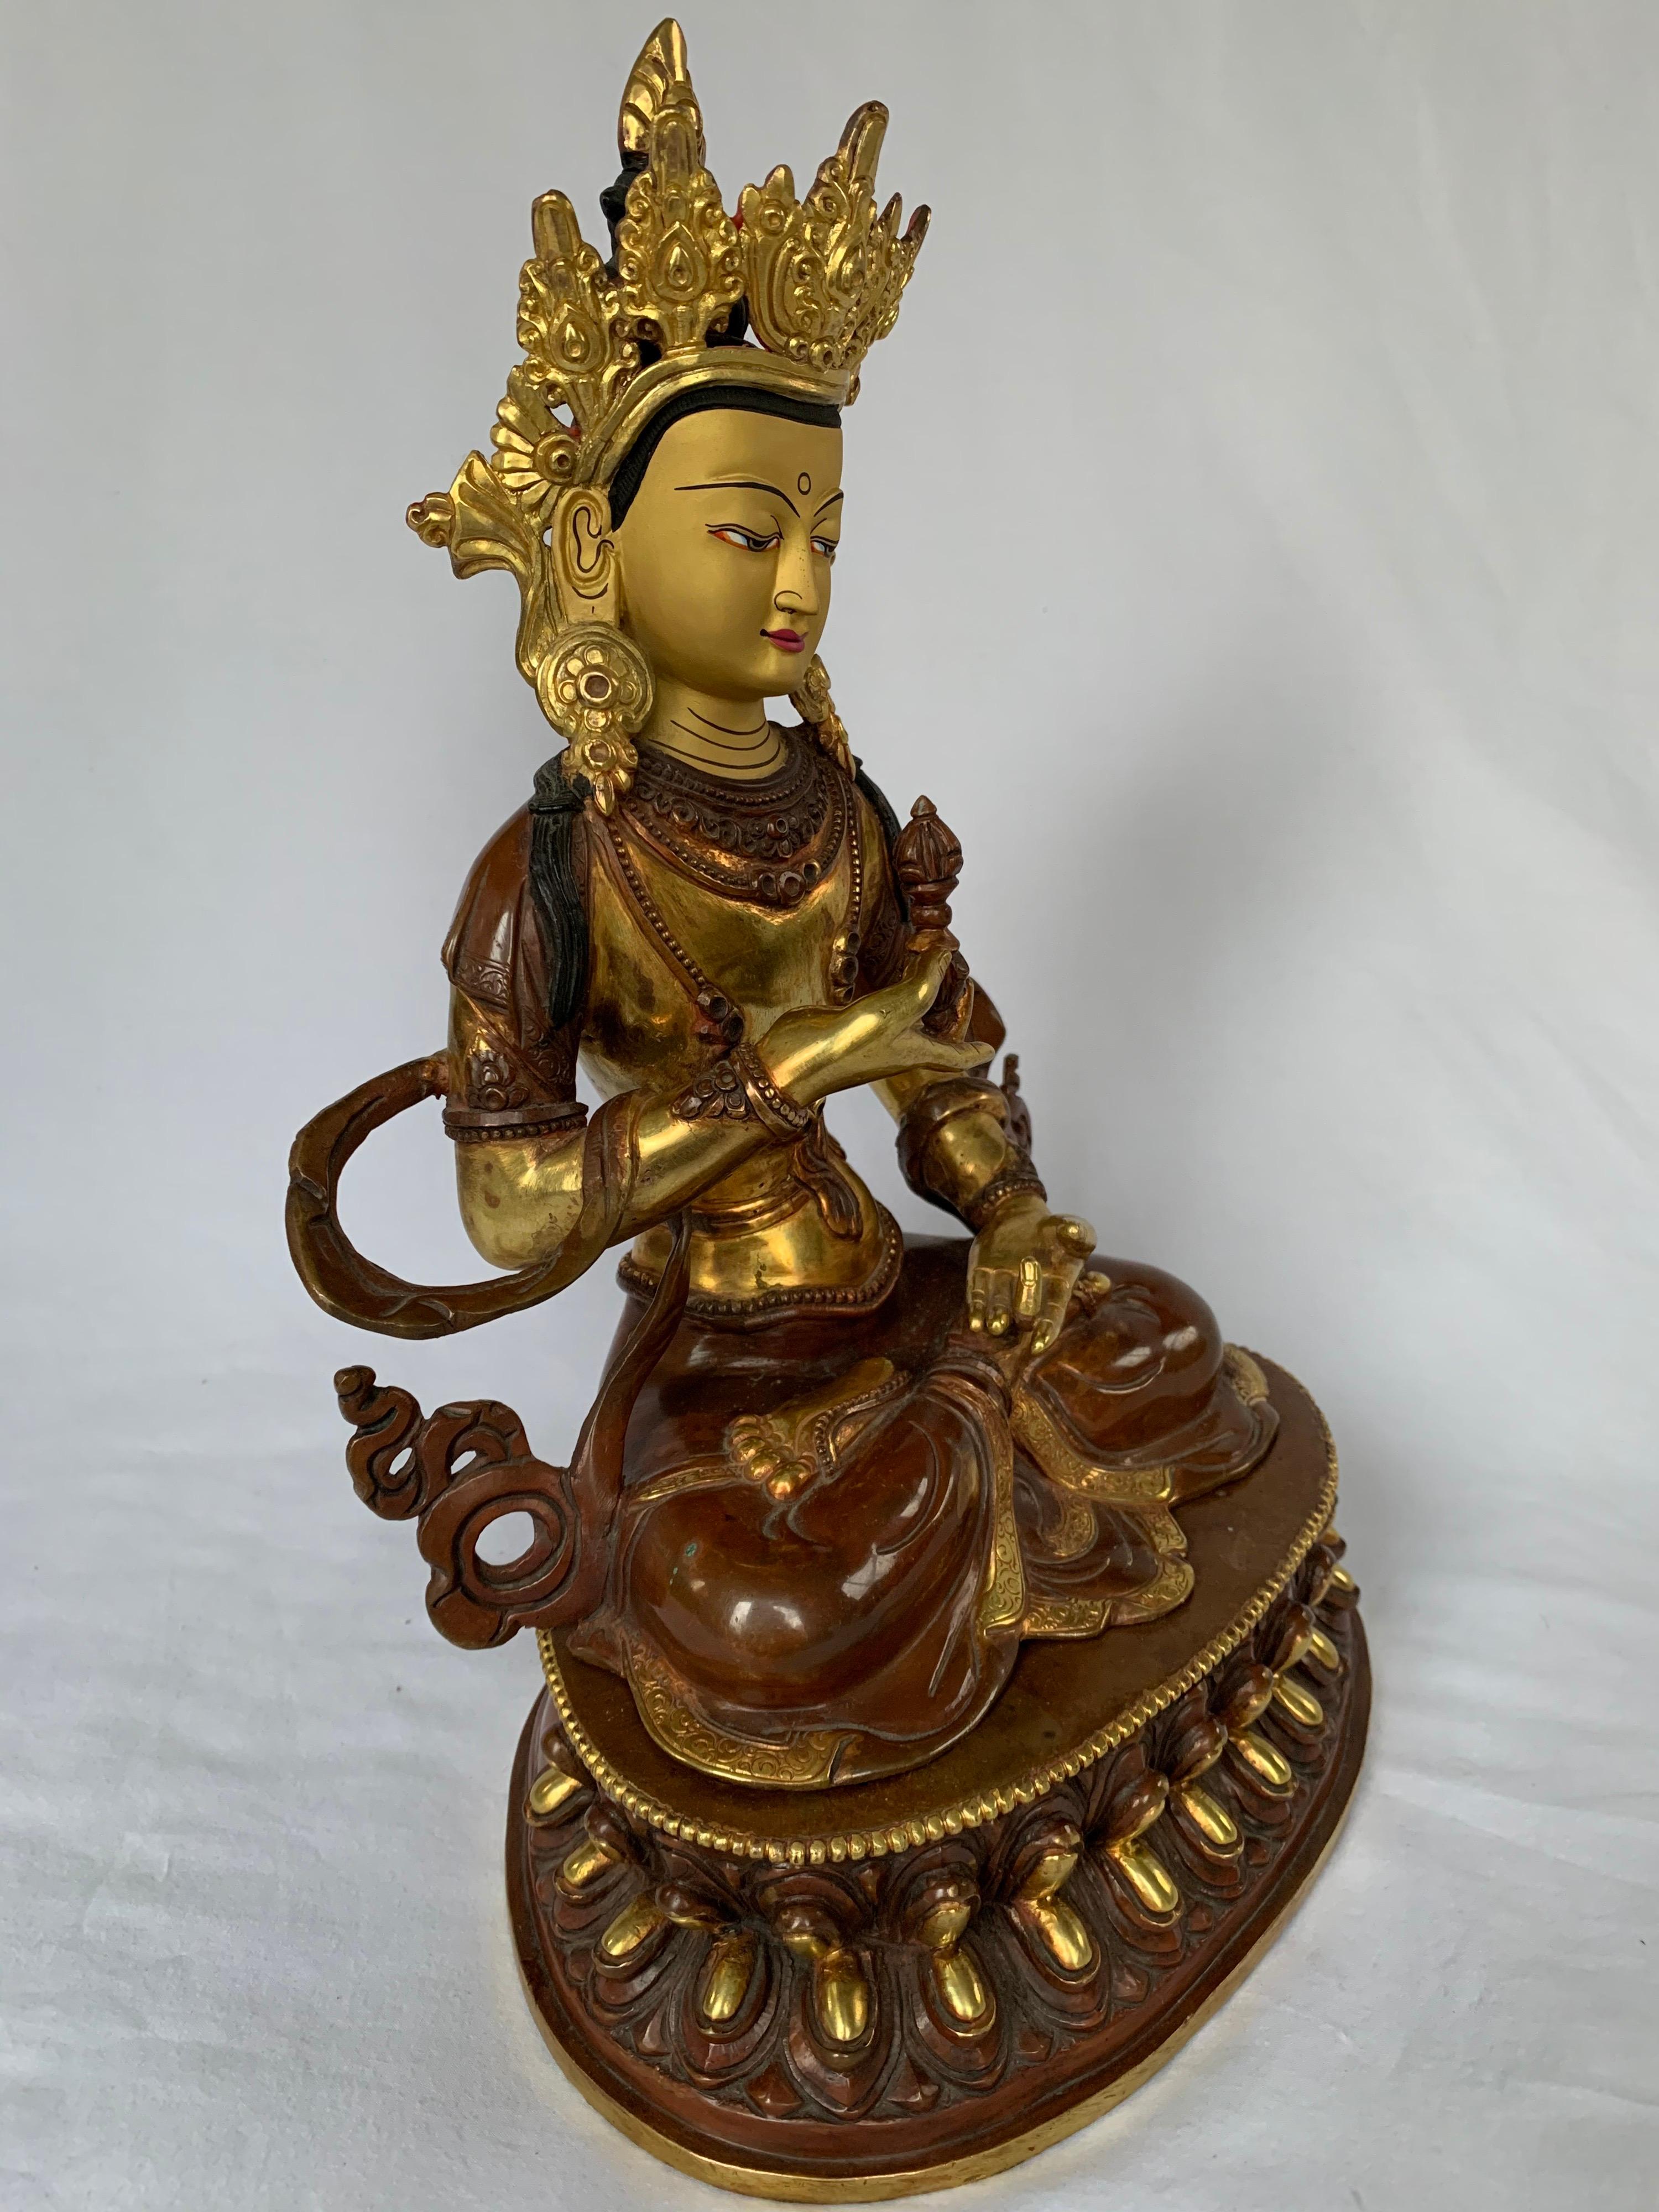 This statue is handcrafted by lost wax process which is one of the ancient process of metal craft. Vajrasattva is seated on lotus with one hand holding a Vajra which is a symbol of protection. 24K real gold plating is done on copper body and it